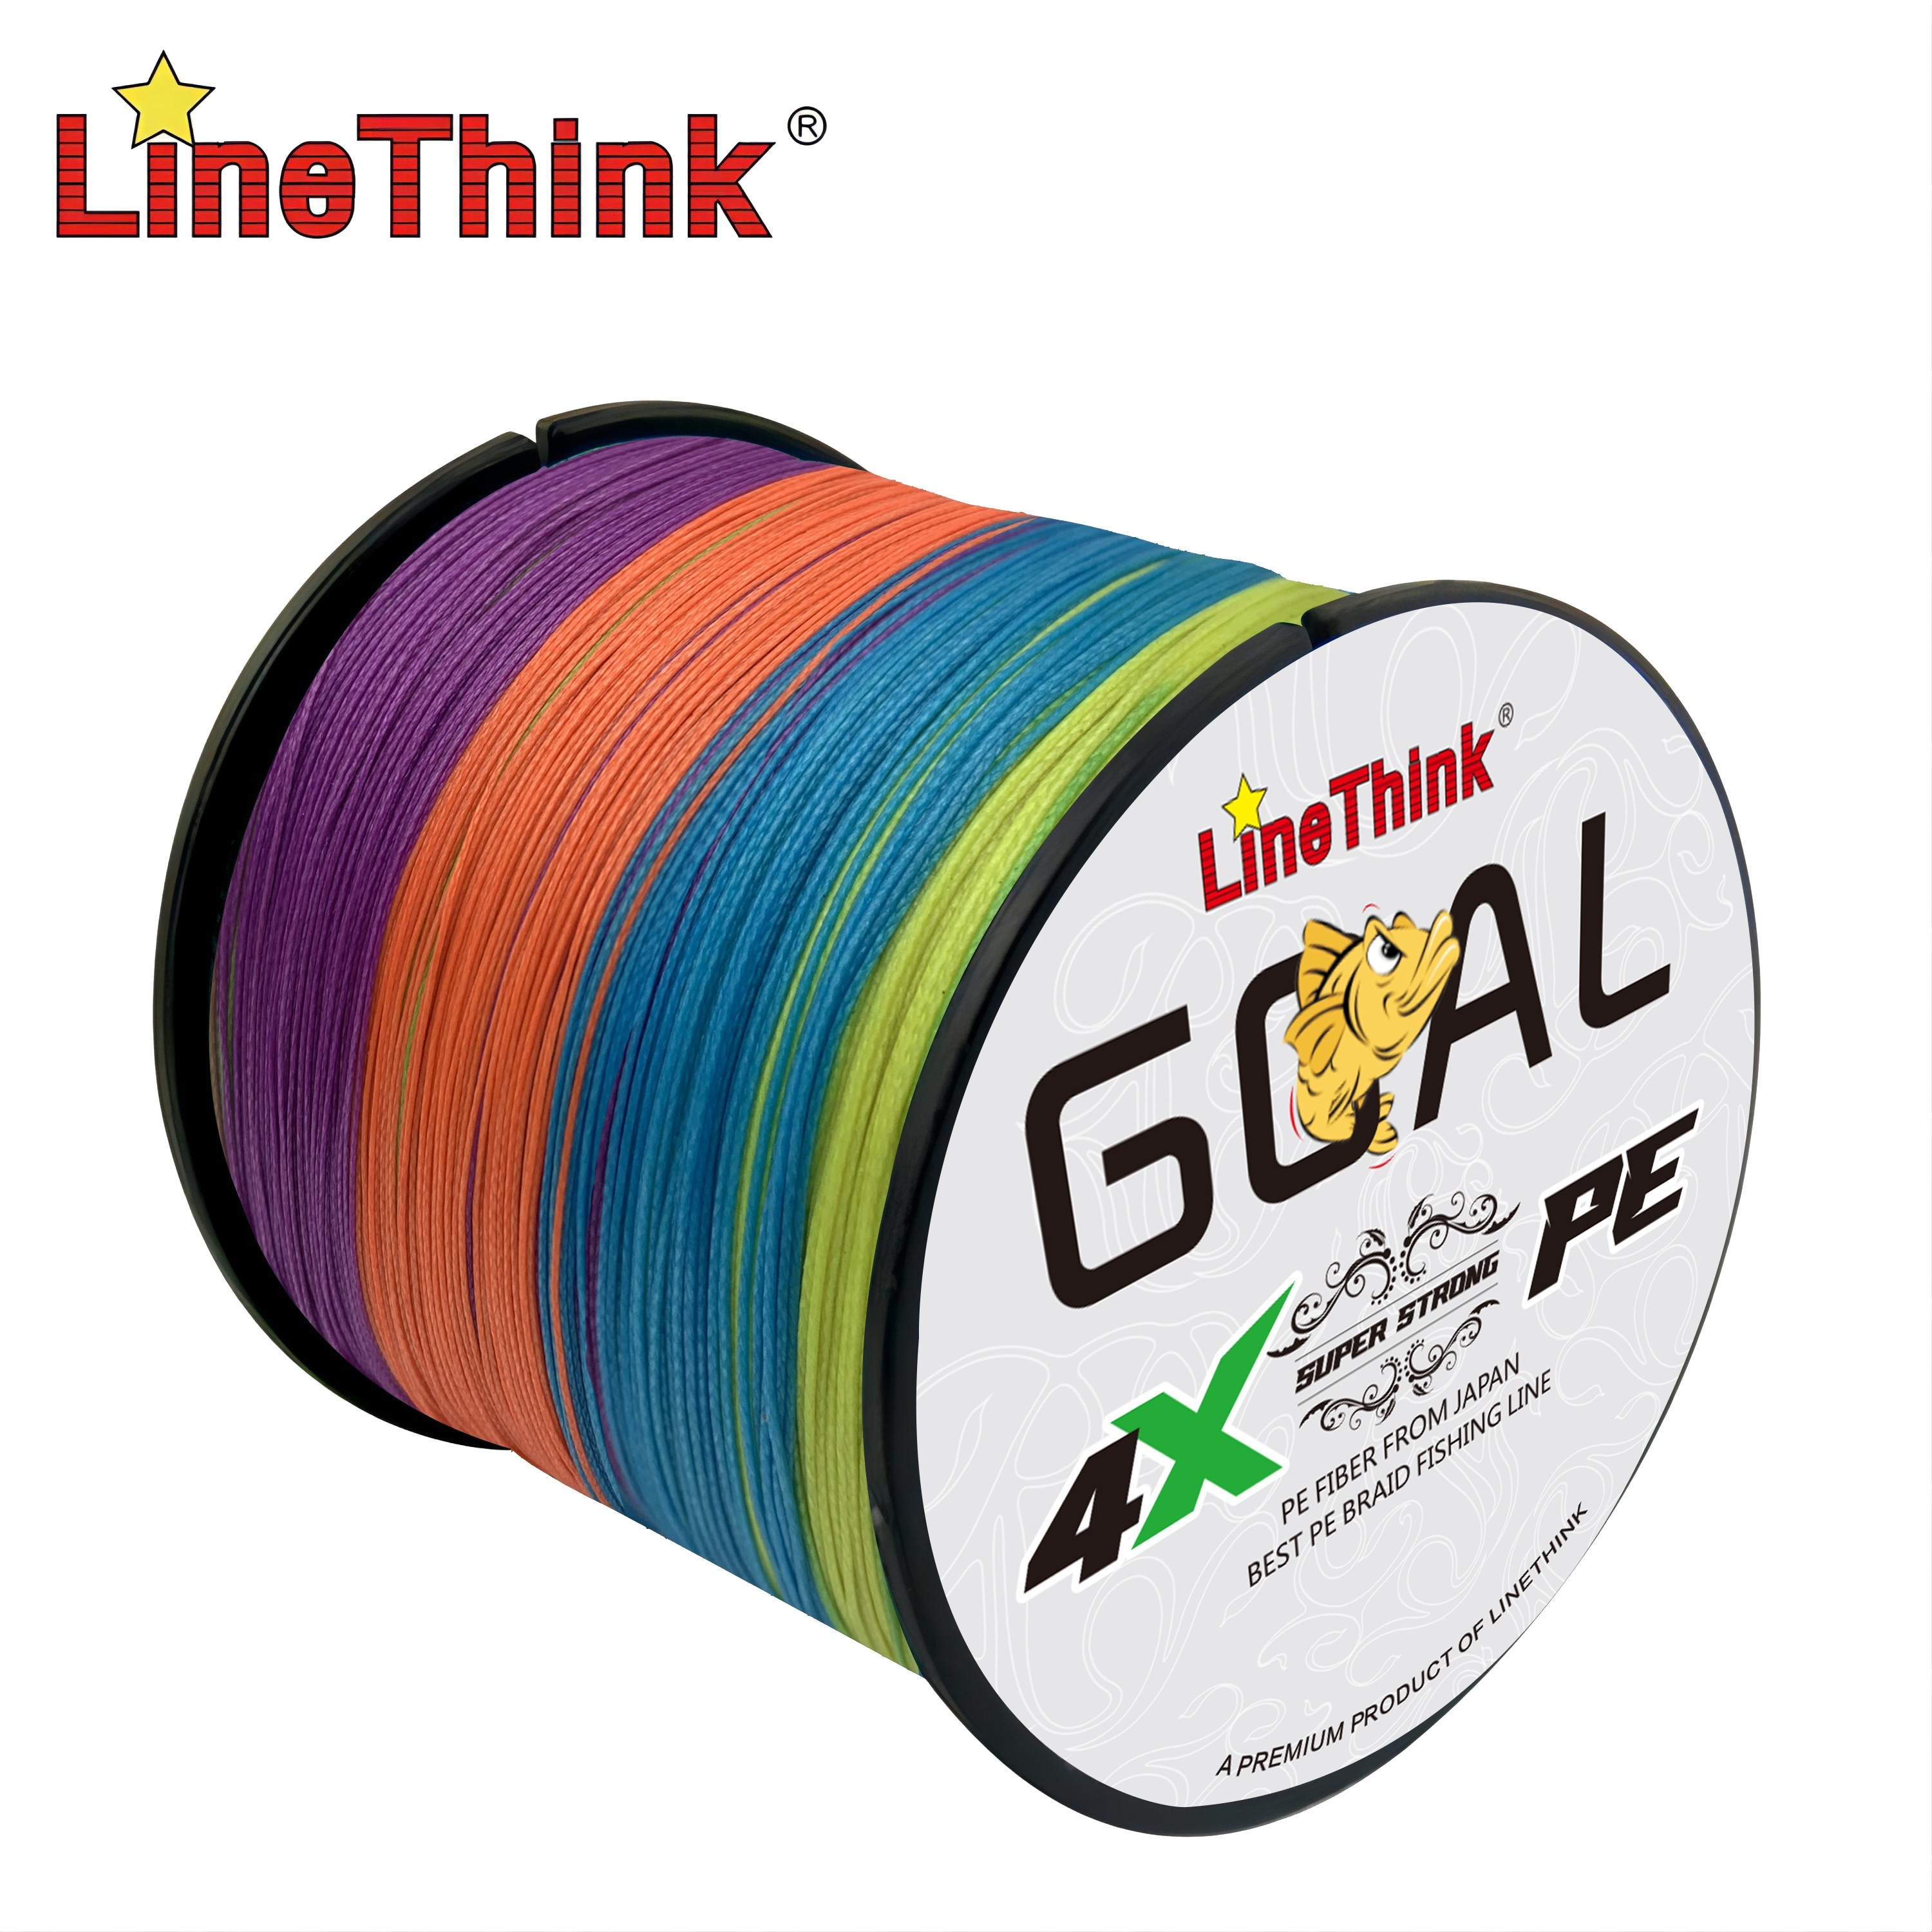 

Linethink Goal 1pc 300m/500m Durable 4-strand Multifilament Pe Braided Fishing Line, Super Strong, Wear-resistant, Smooth Casting, Lure And Sea Fishing Accessory